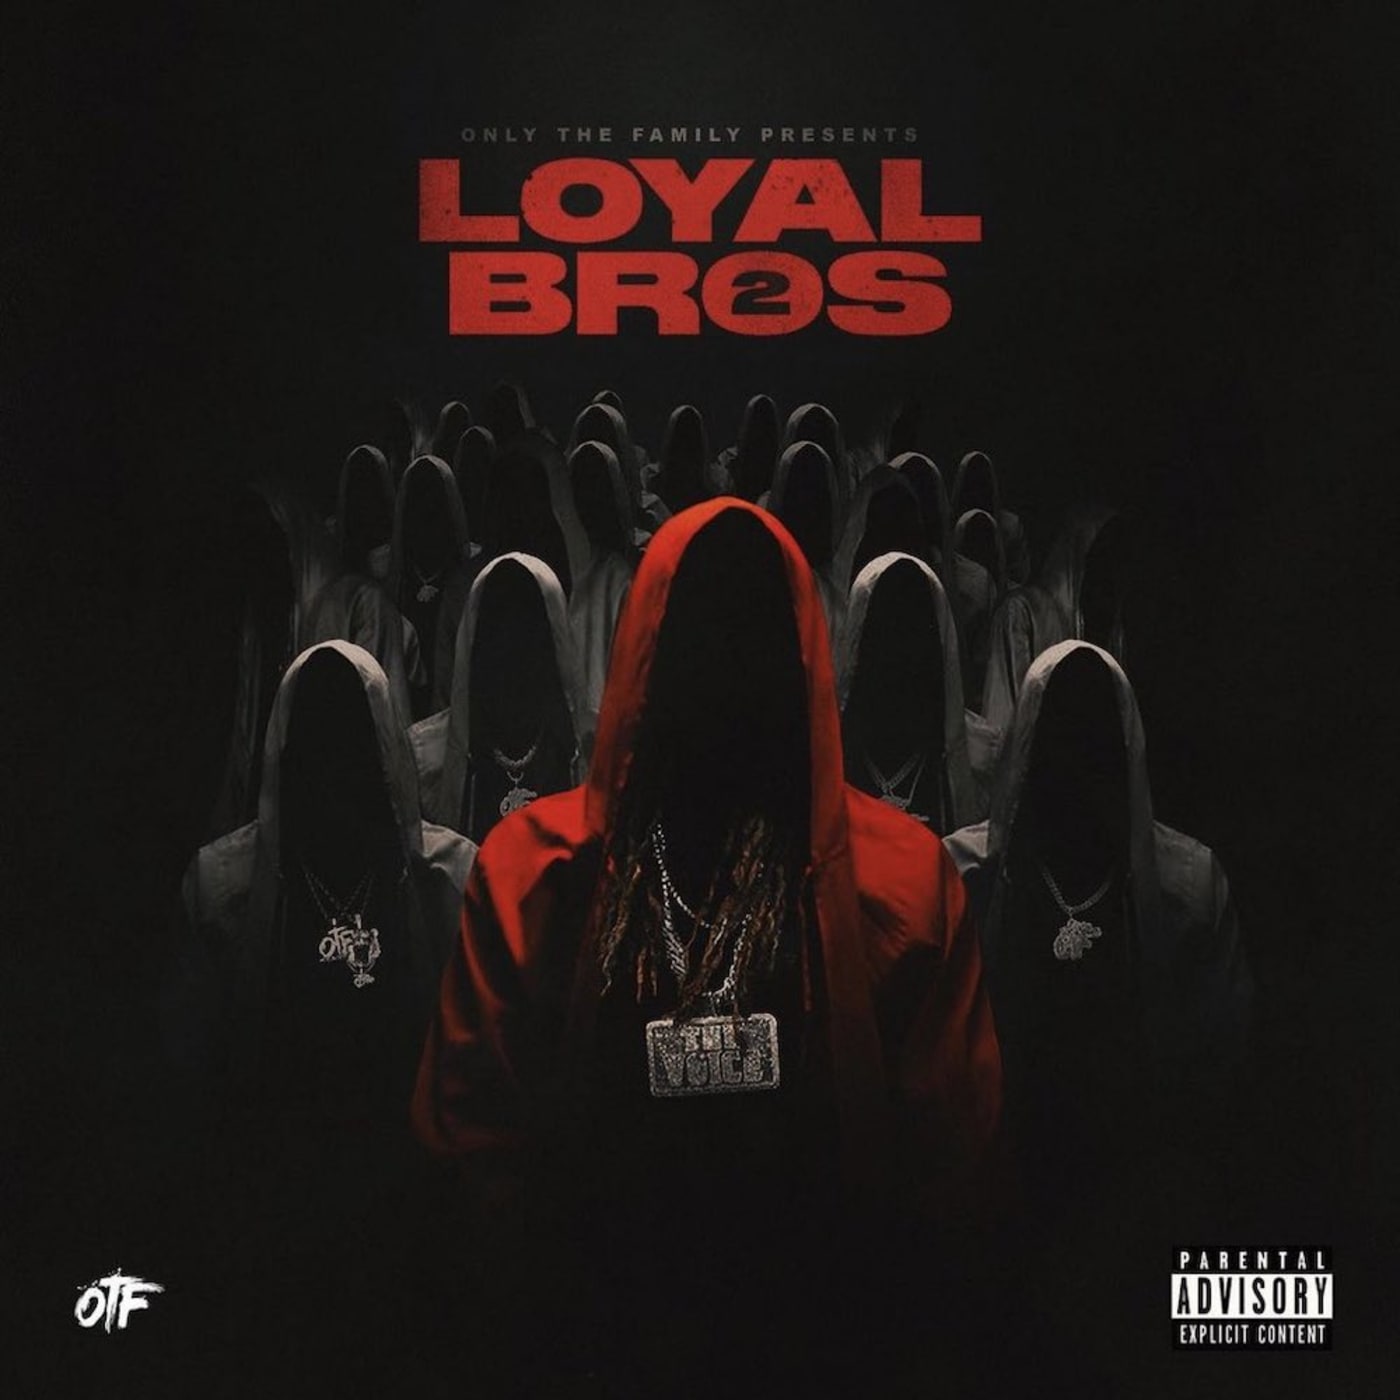 Lil Durk’s Only The Family ‘Loyal Bros 2’ compilation